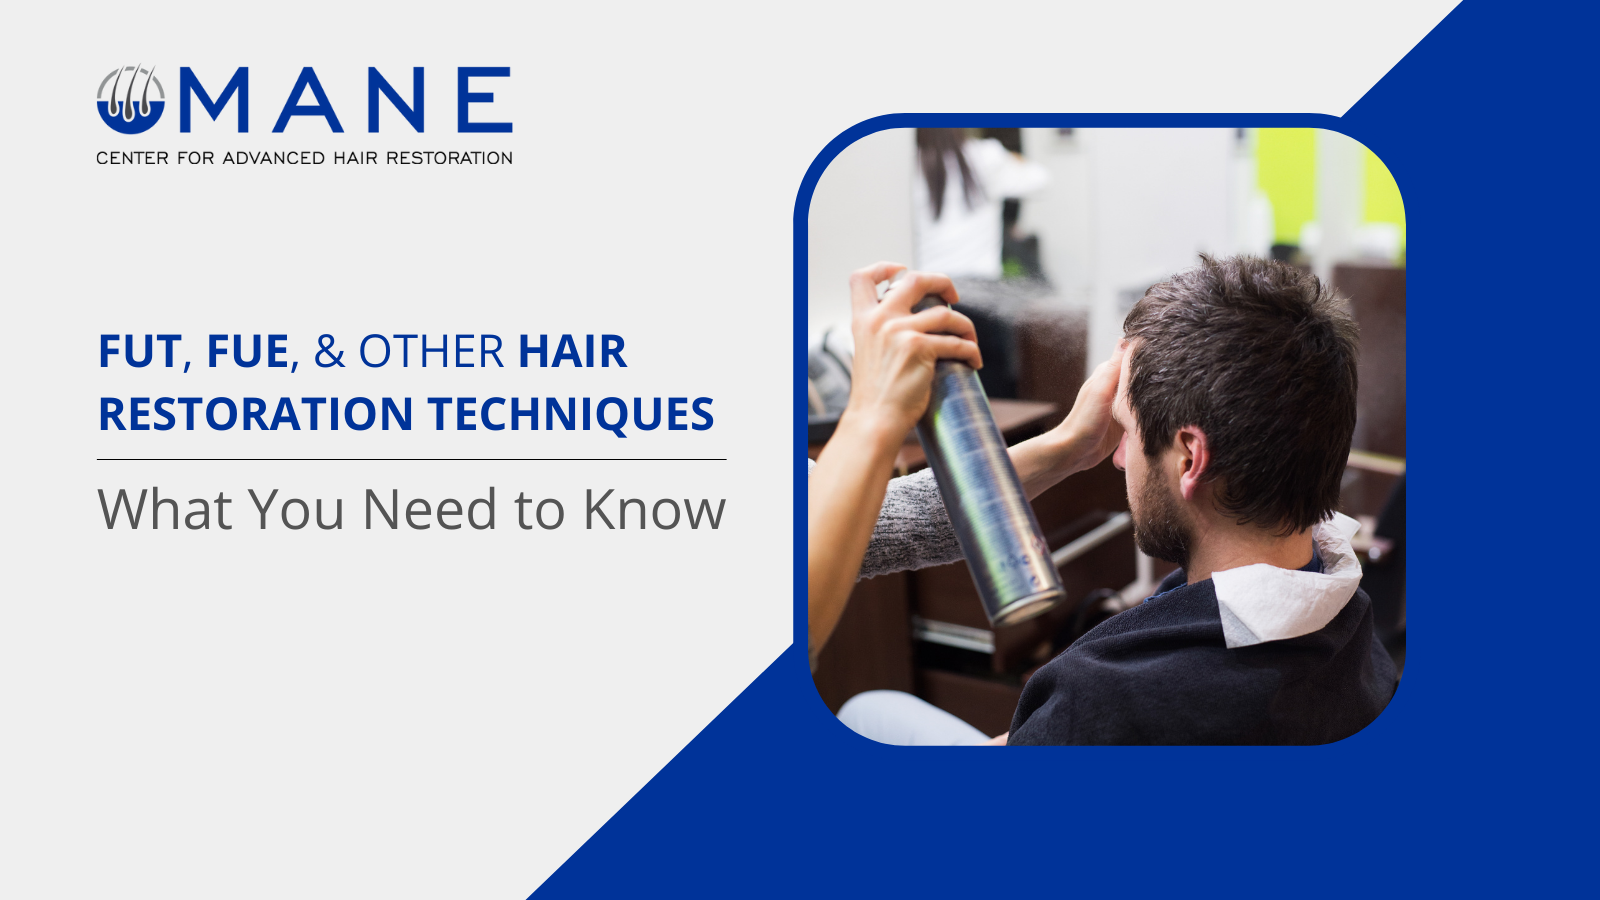 FUT, FUE, & Other Hair Restoration Techniques: What You Need to Know